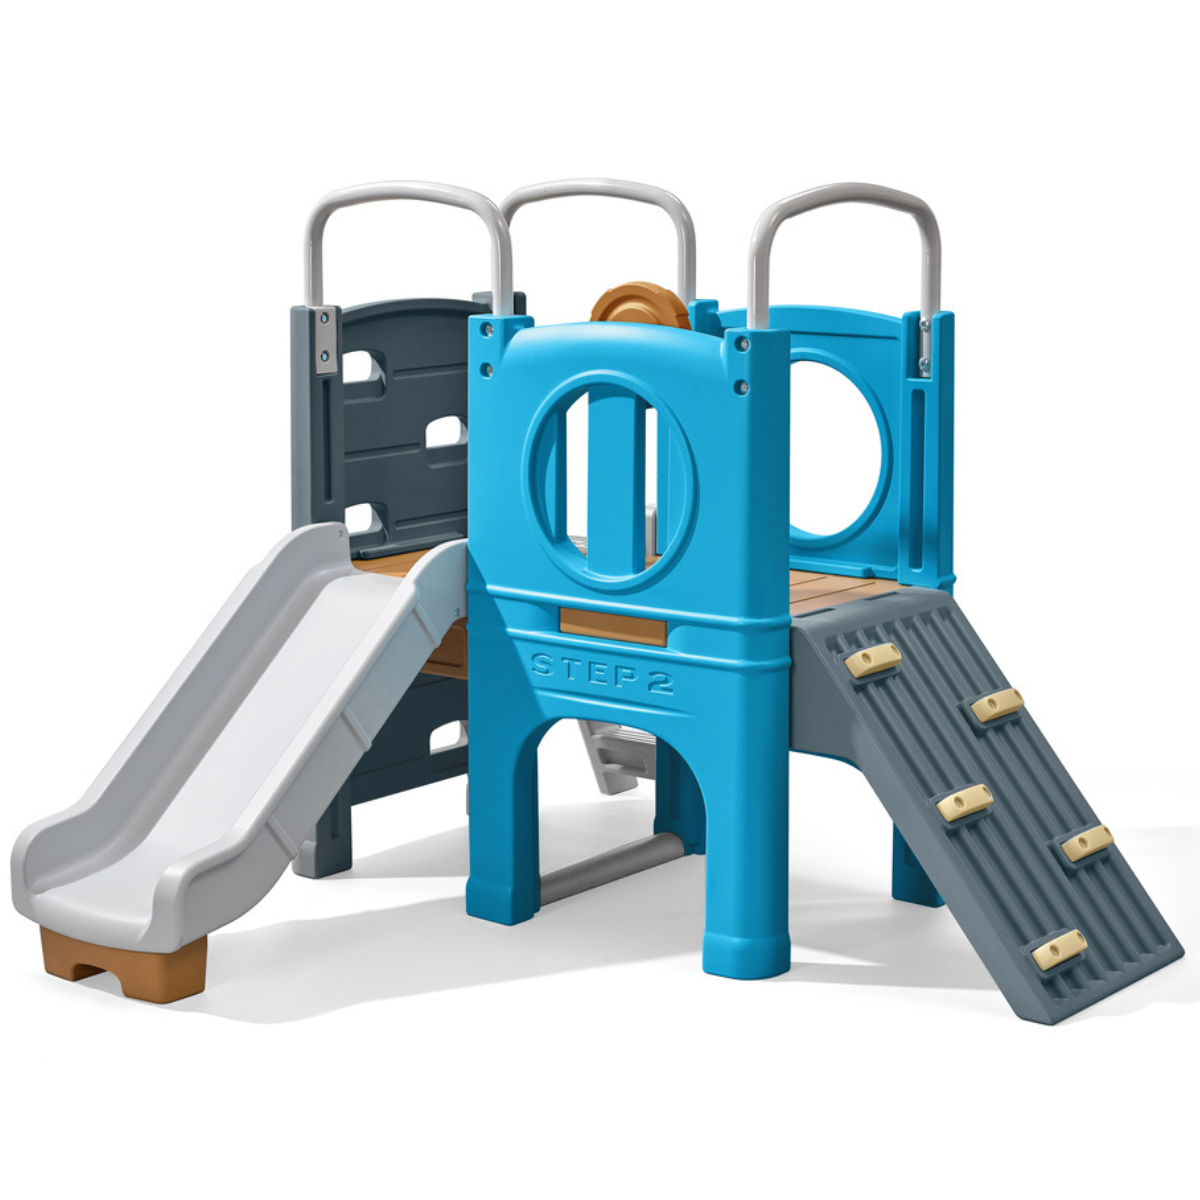 Scout &amp; Slide Climber Playset